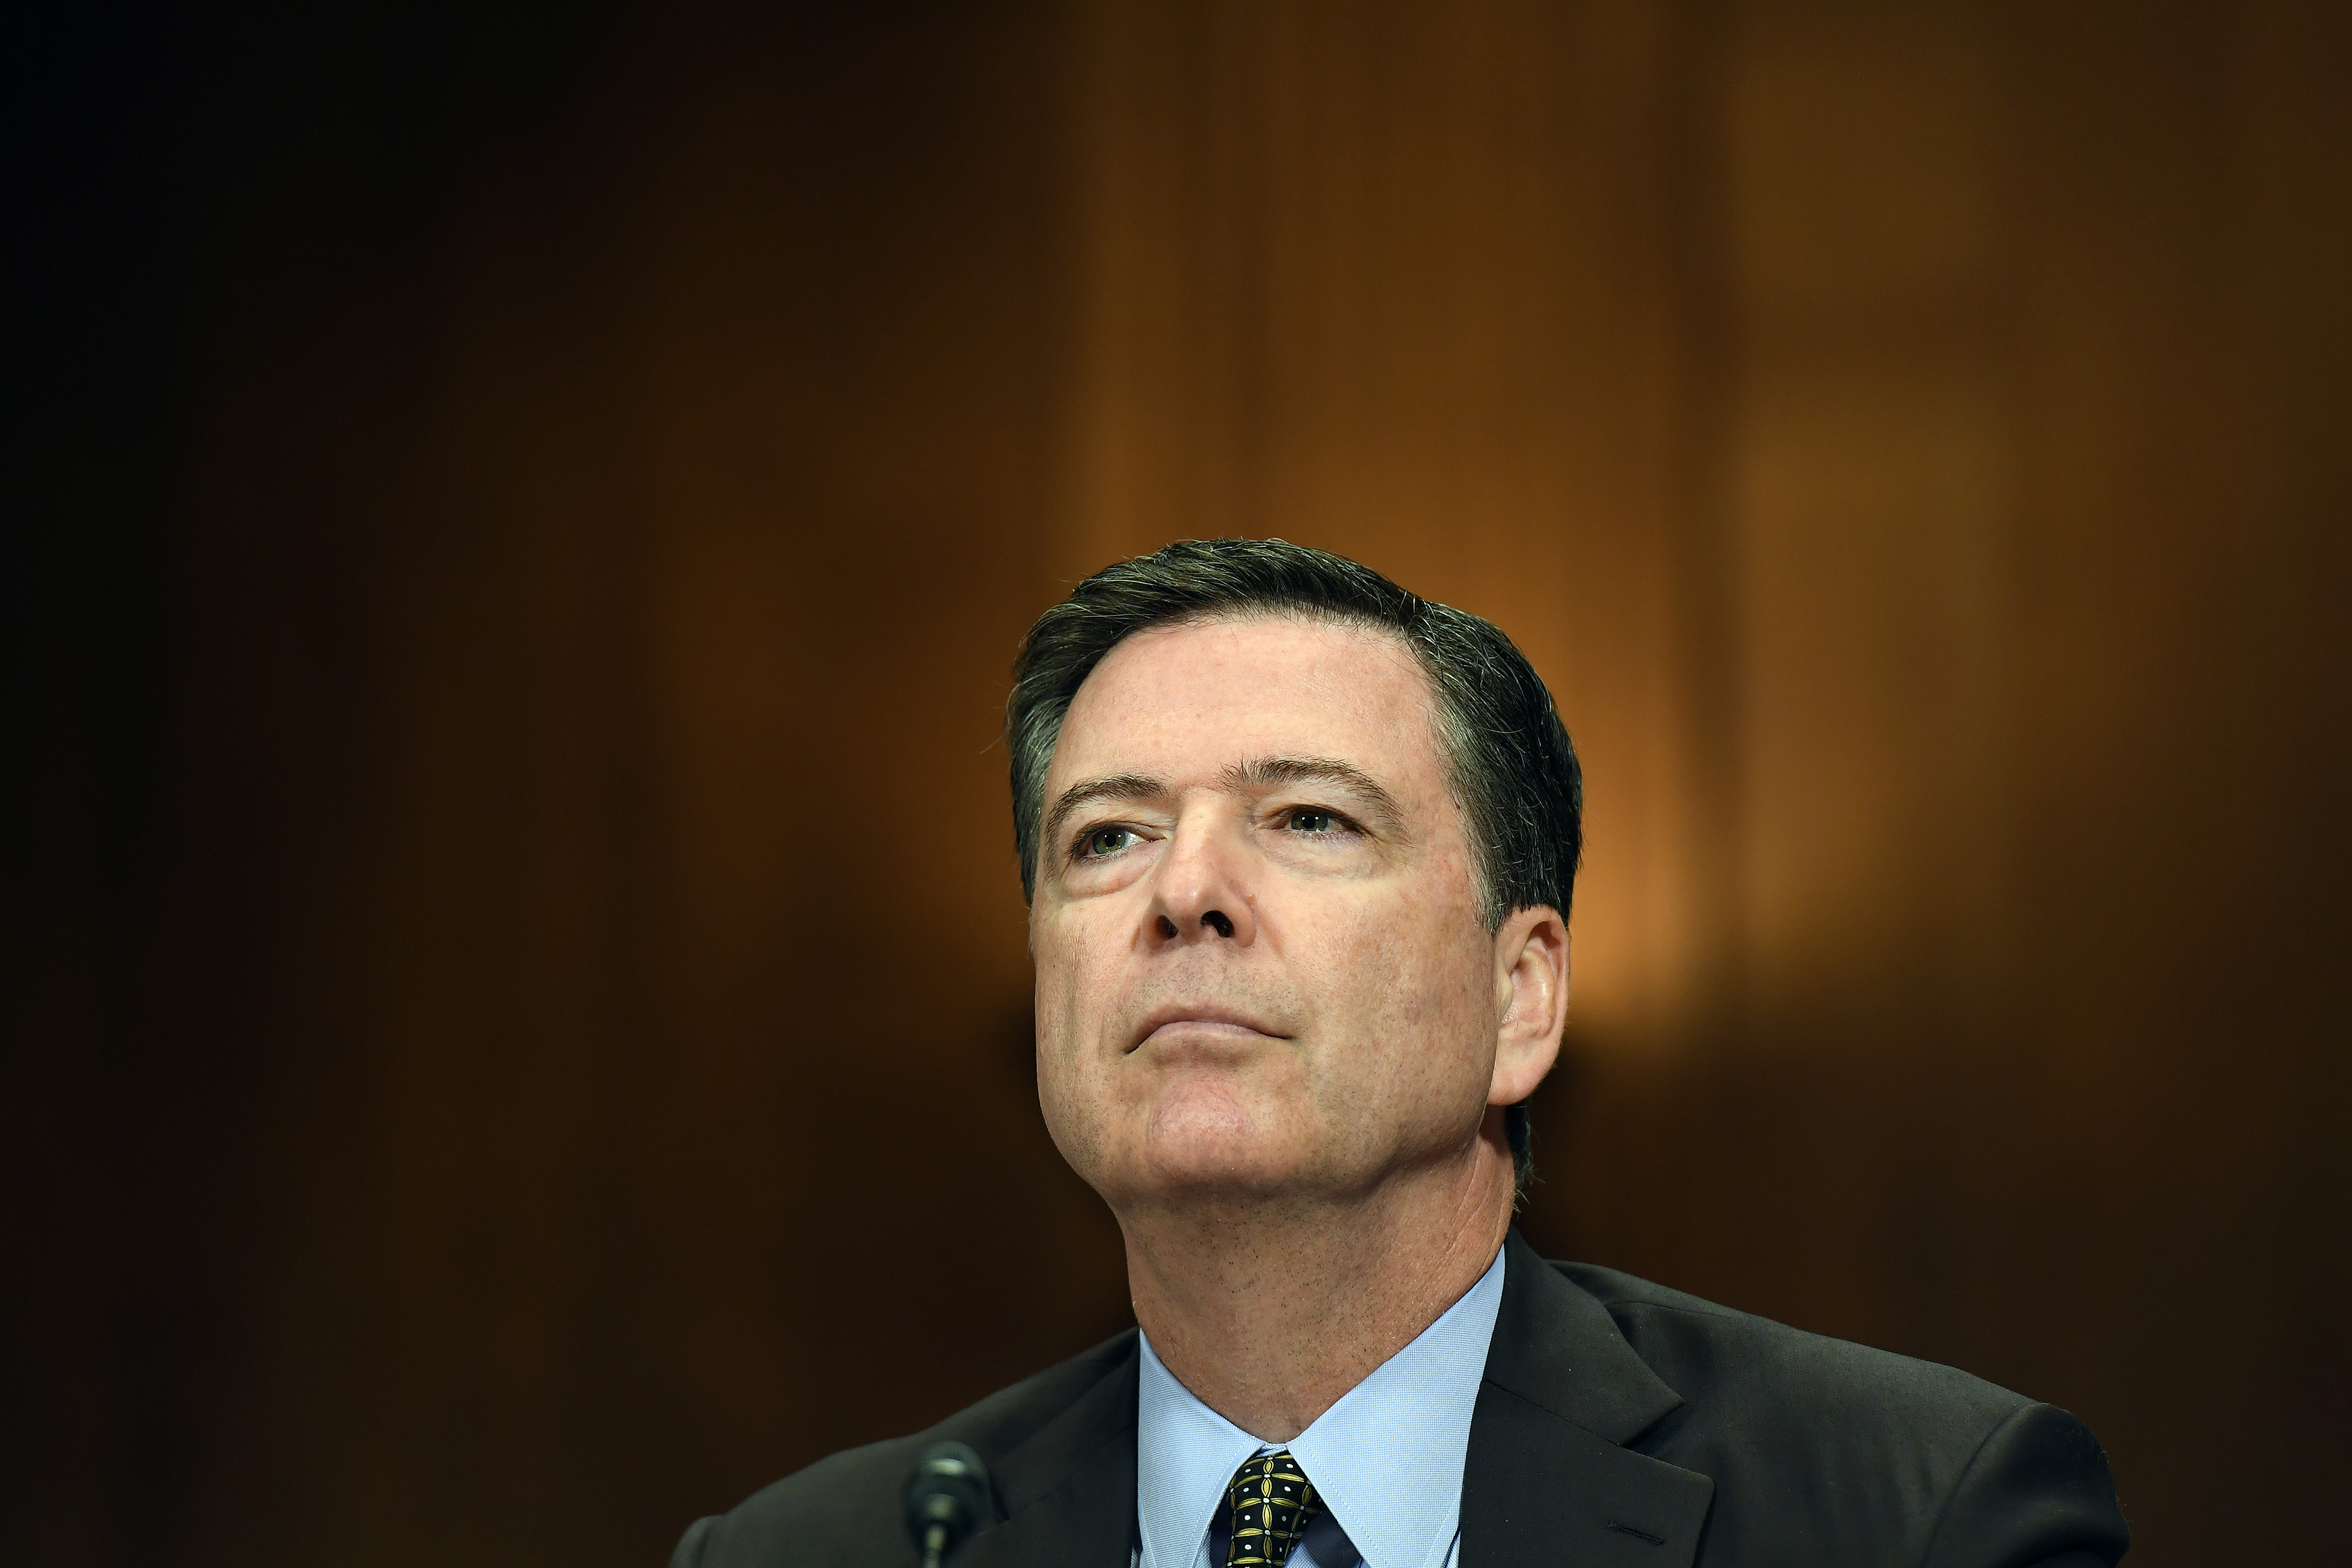 Federal Bureau of Investigation Director James Comey appears before the Senate Judiciary Committee in the Dirksen Senate Office Building on Wednesday May 03, 2017 in Washington, DC. (The Washington Post—Getty Images)